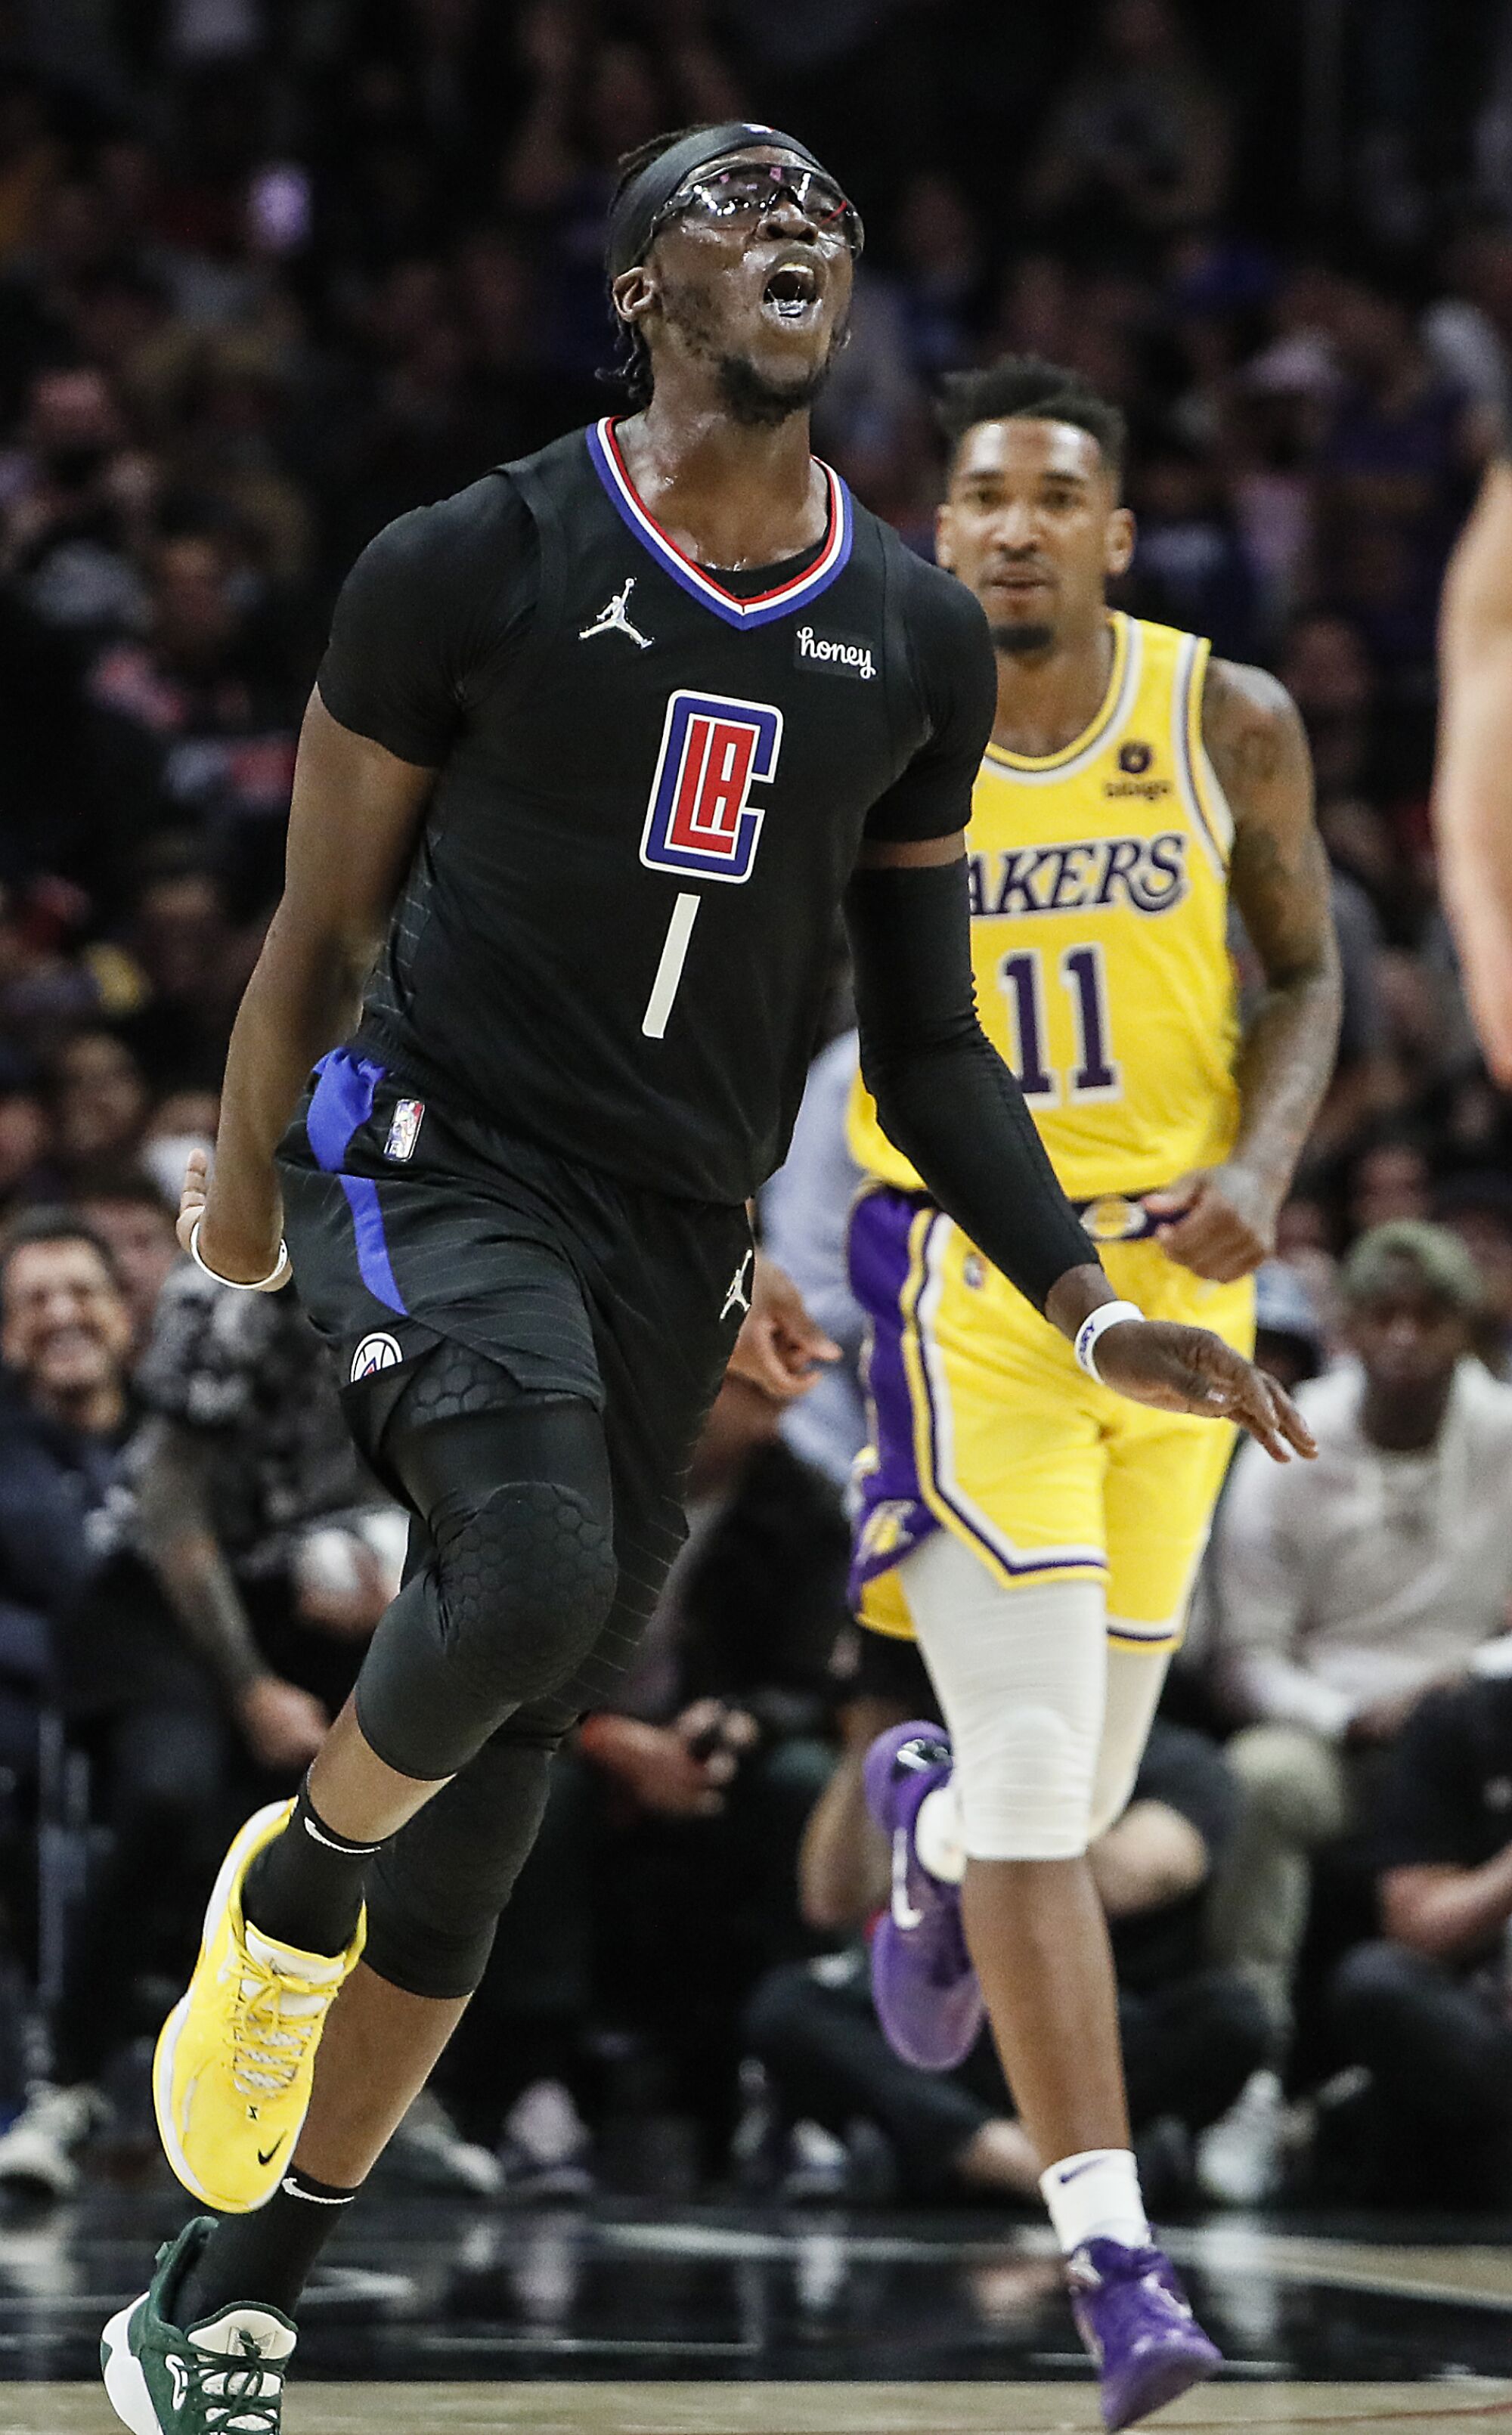 Clippers guard Reggie Jackson encourages fans to cheer as he leads the Clippers to a 132-111 win over the Lakers.